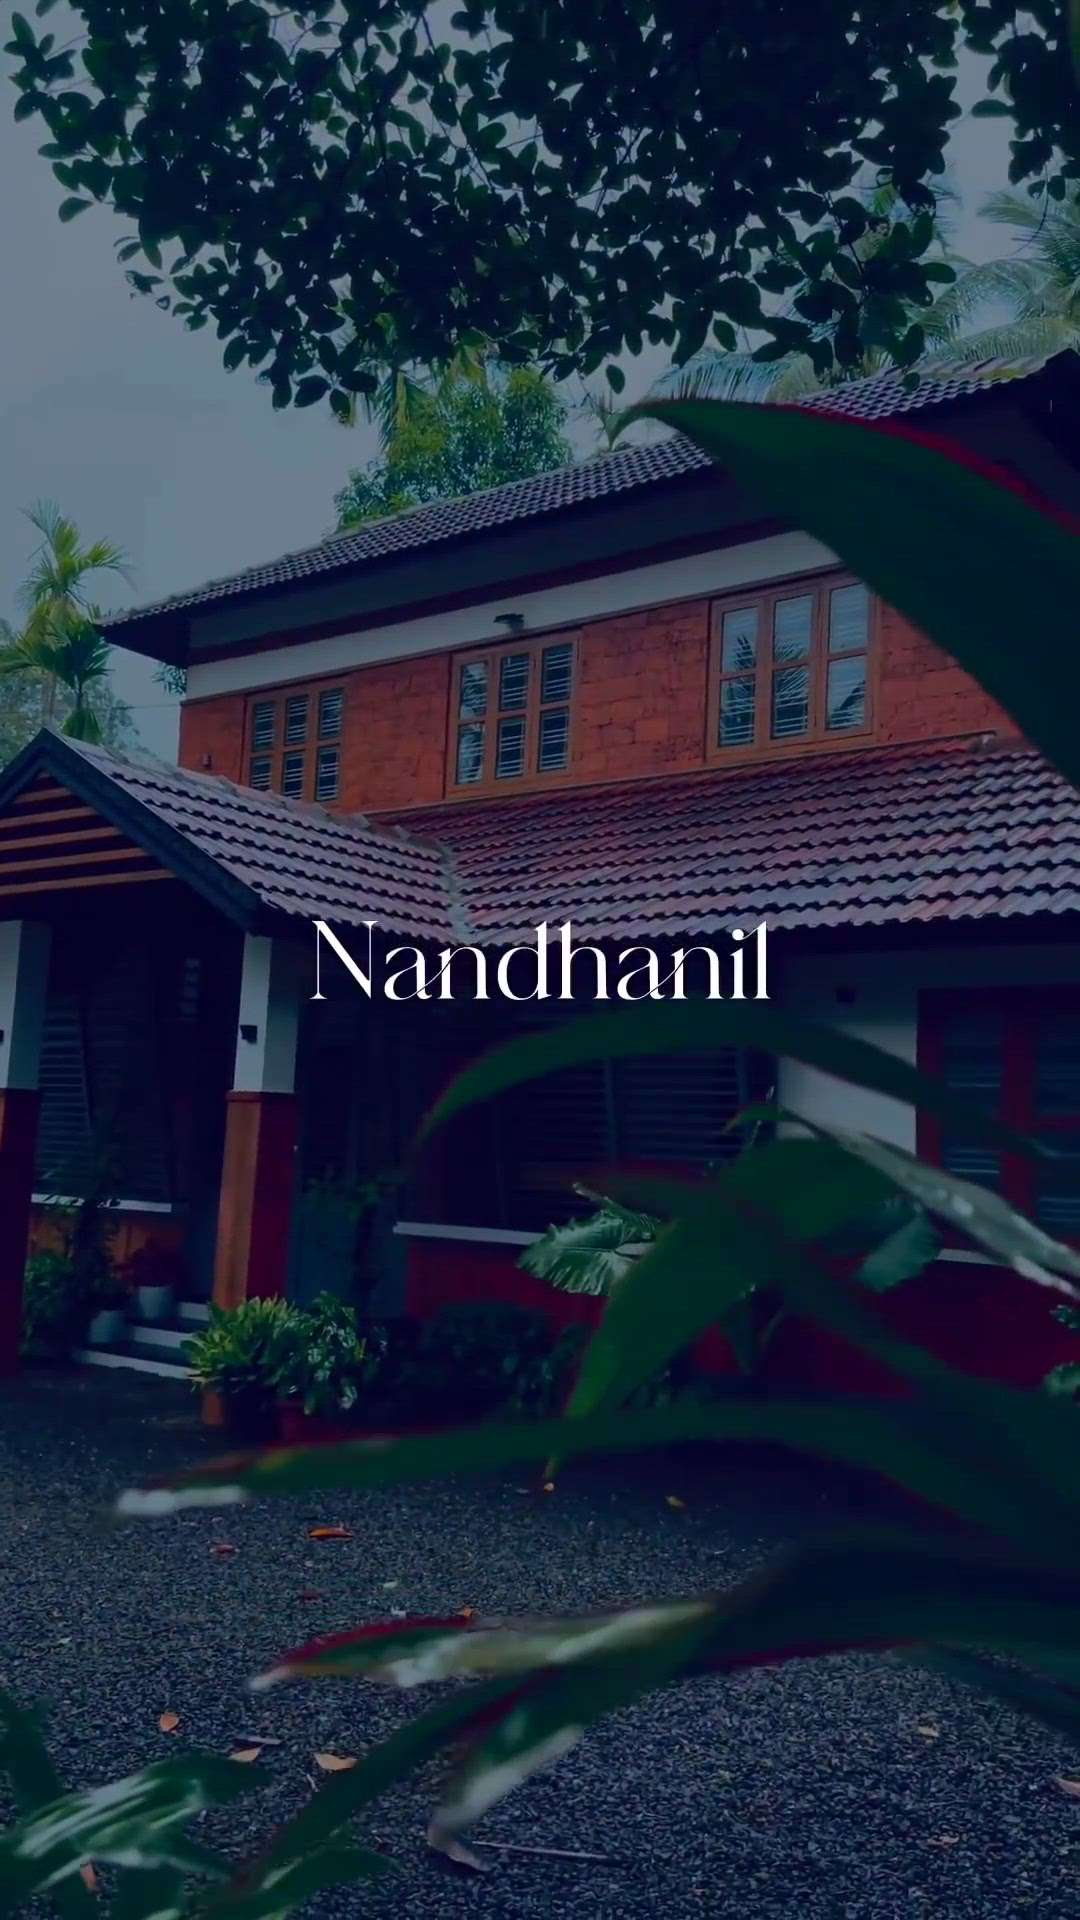 kolo.kerala NANDHANIL

45 Year Old Home Renovation Client: Jabir Nandhanil & Family Location: Thanaloor, Tirur

Area: 1800 sqft

Renovation Budget: 15 Lakhs Work Done By: @as_design_forum Architect: @pmsalim3316

Kolo - India's Largest Home Construction Community

#residence #house #home #tropicalhouse #before&after #courtyard #staircase #home #keralahomes #budgethome #tropicalarchitecture #landscape #landscapedesign #insideoutside #spaces #instahomes #keralahomes #architecture #homedecor #interiordesign #house #indoorplants #greenhome #decor #artificialgrass